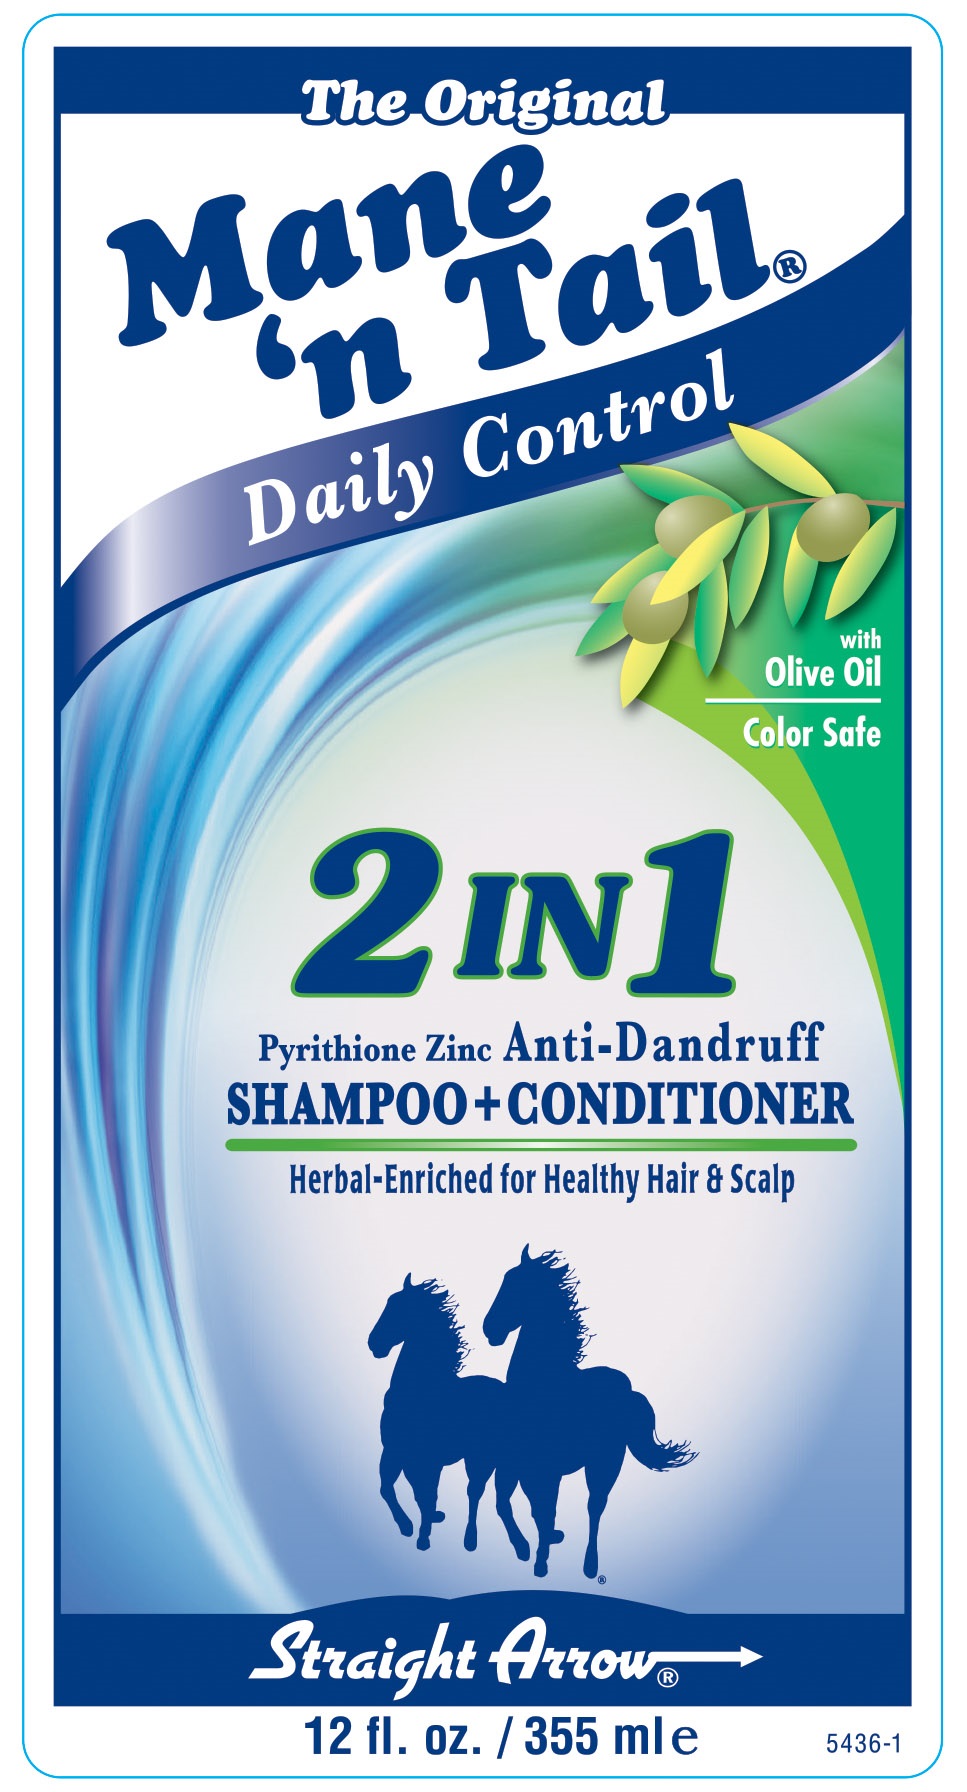 The Original Mane n Tail Daily Control 2 in 1 Anti dandruff shampoo and conditioner